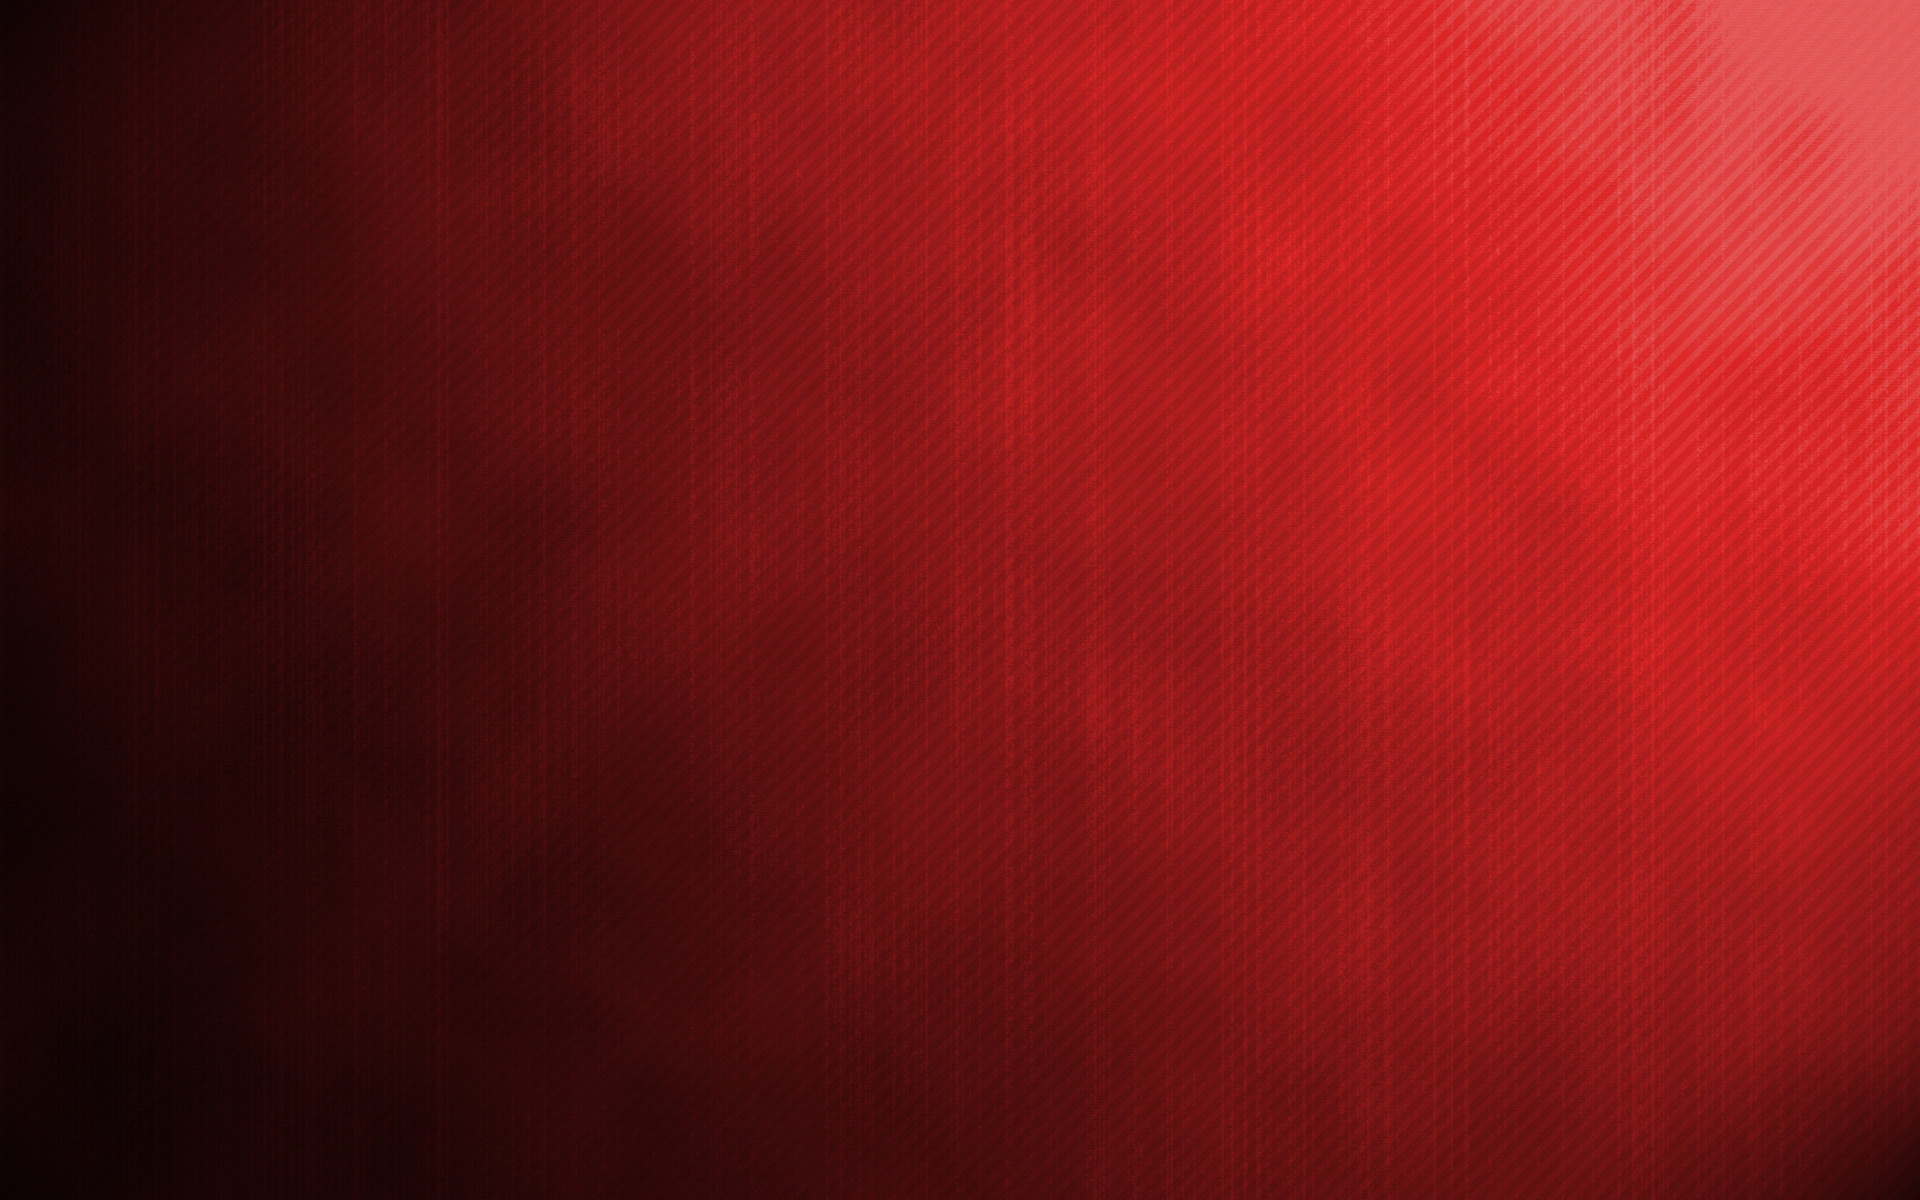 1920x1200 simply-red-backgrounds-wallpapers.jpg